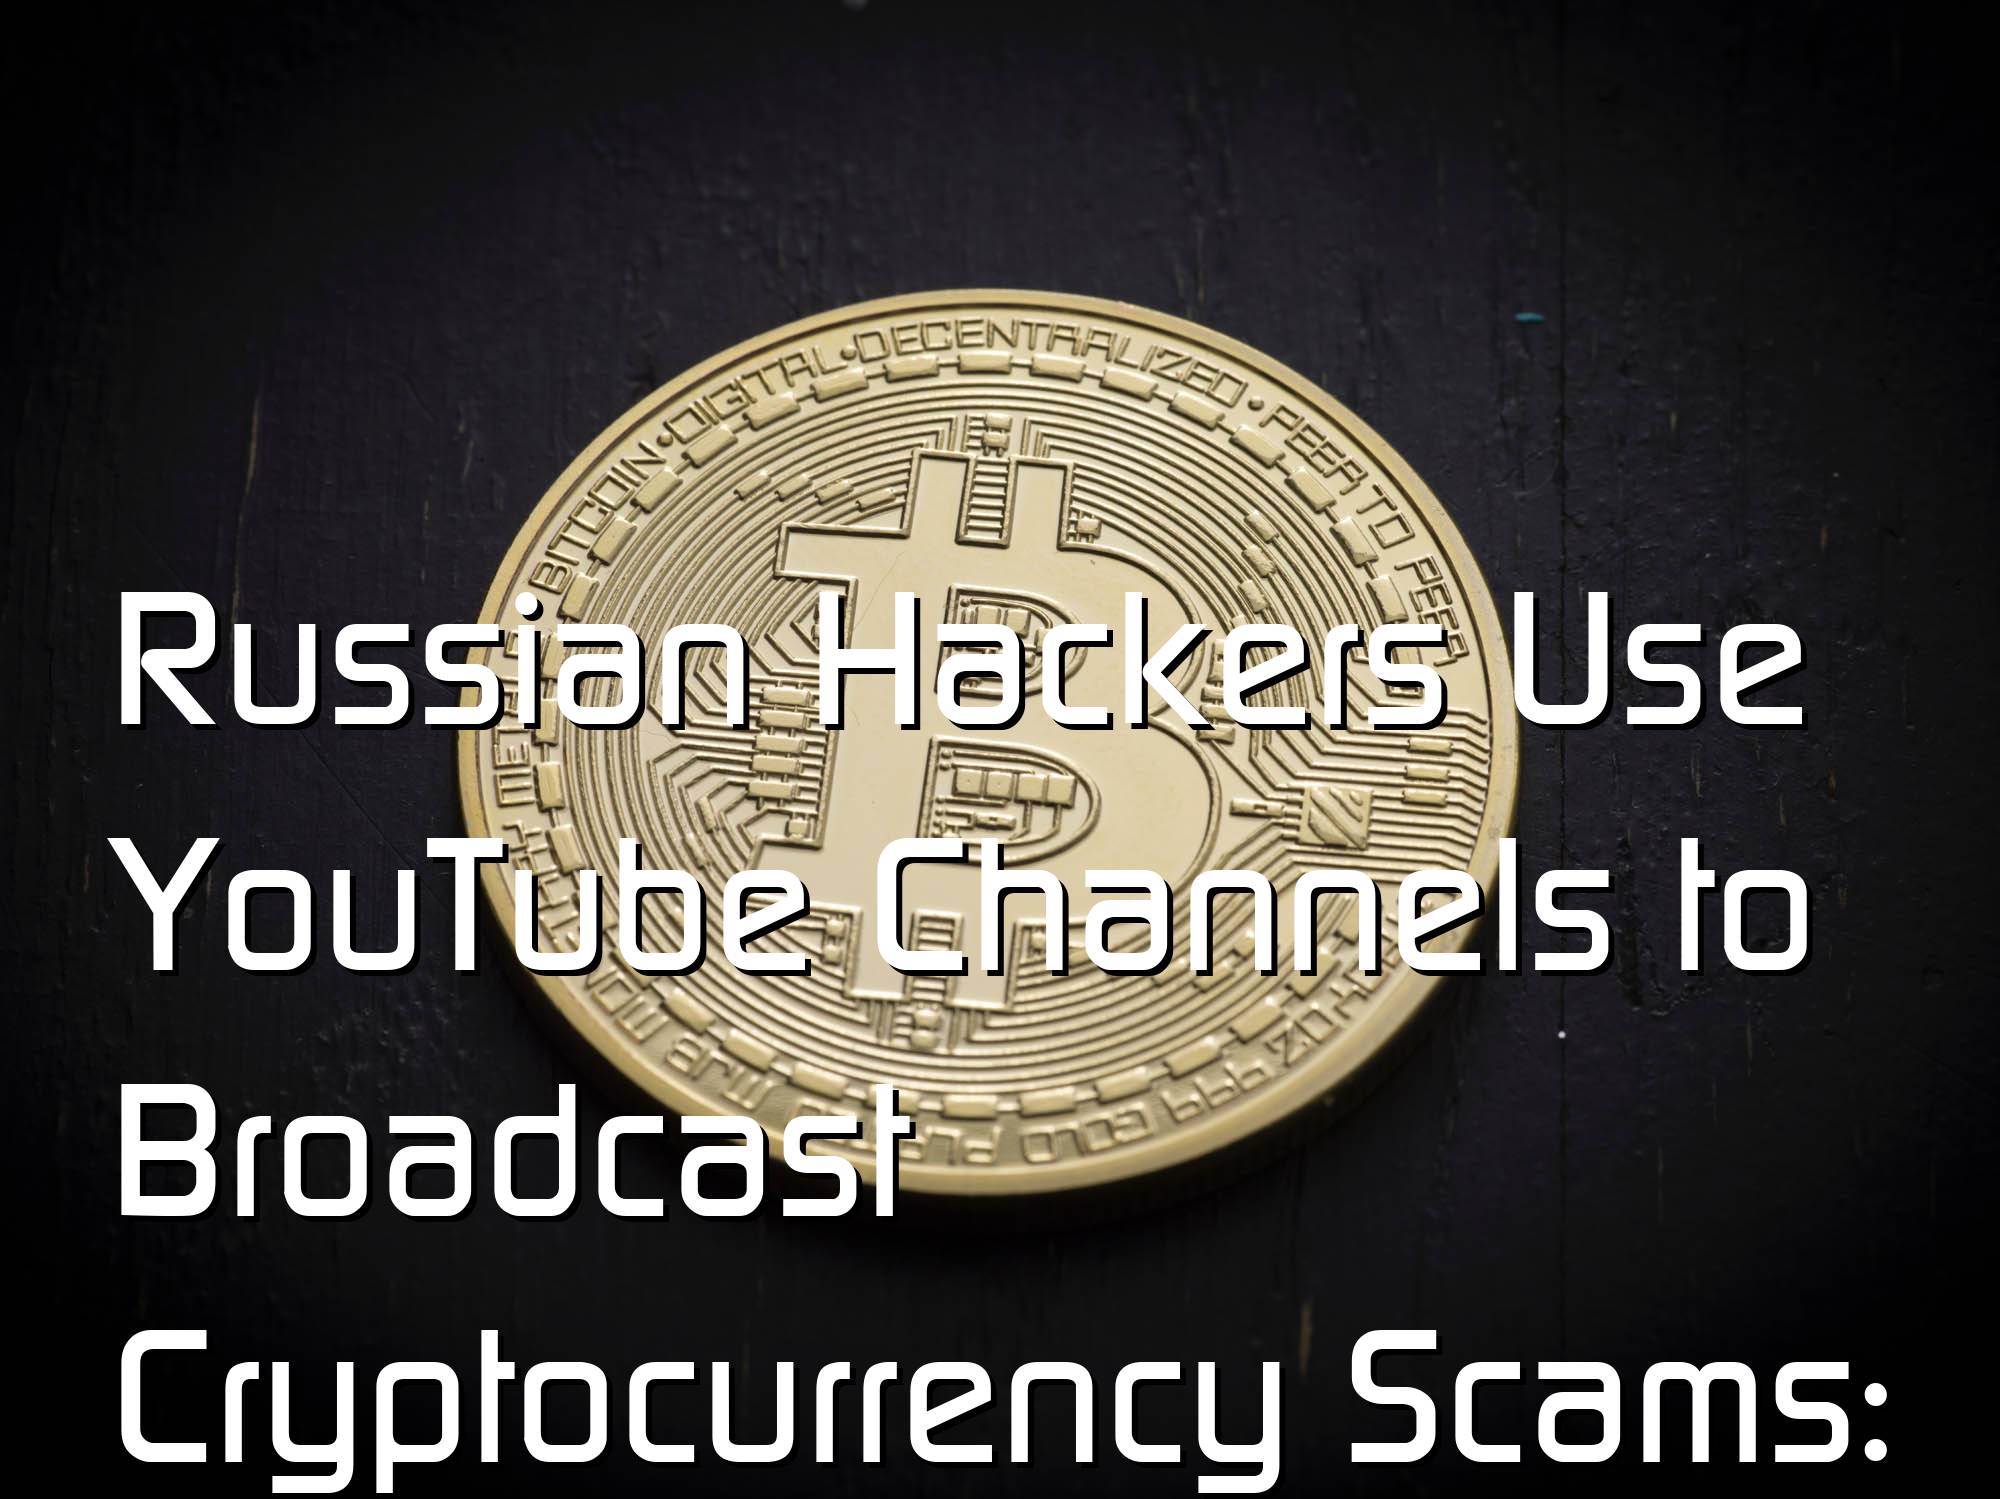 @$61382.4 Russian Hackers Use YouTube Channels to Broadcast Cryptocurrency Scams: Google Report